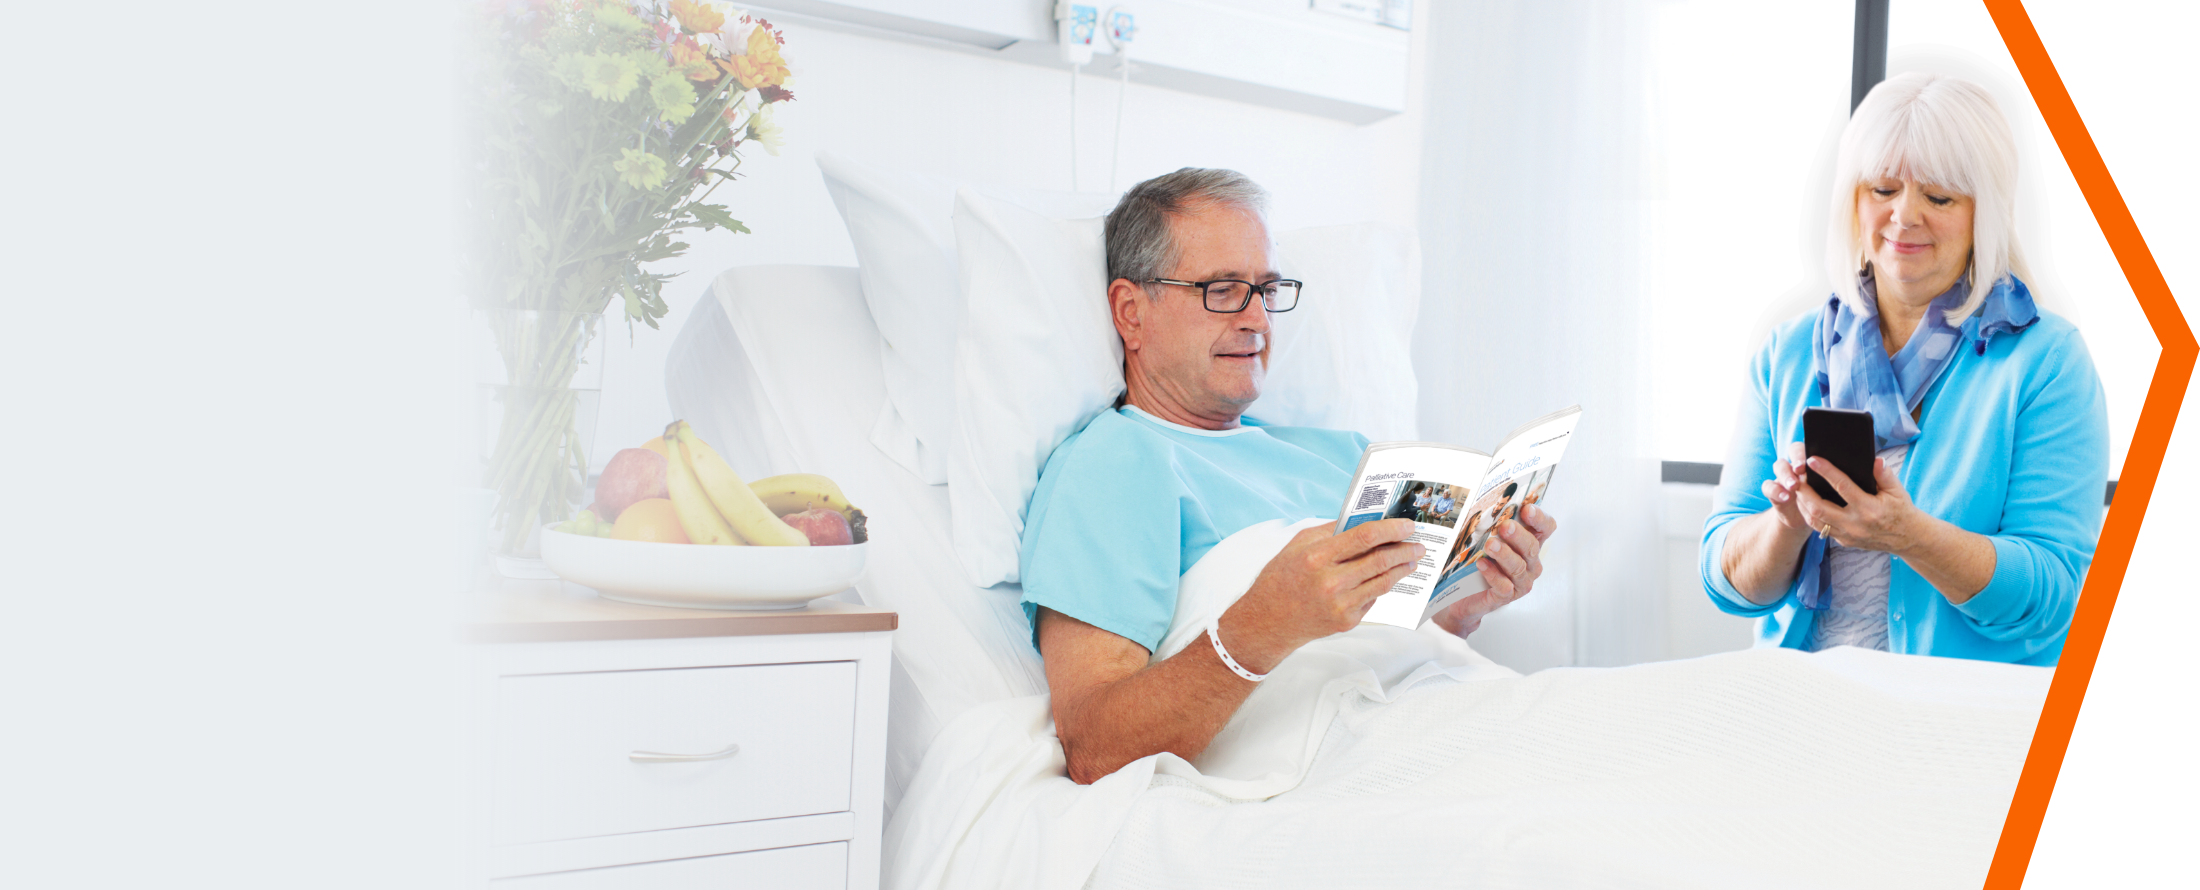 Man and woman reading the patient guide in a hospital room.